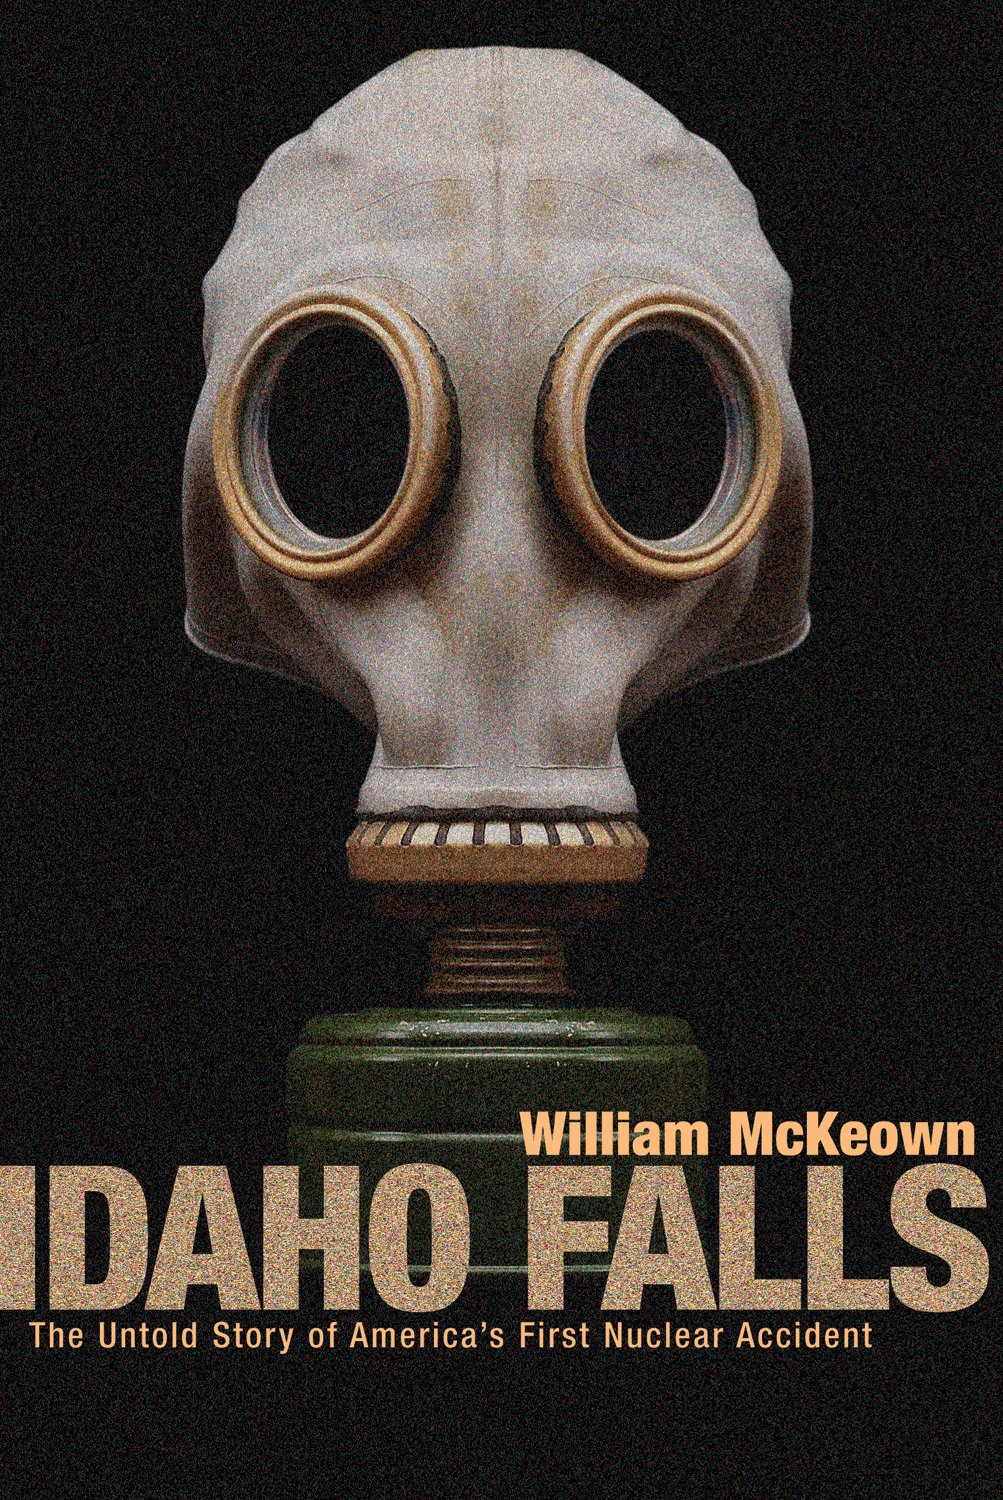 Idaho Falls: The untold story of America's first nuclear accident (book cover)